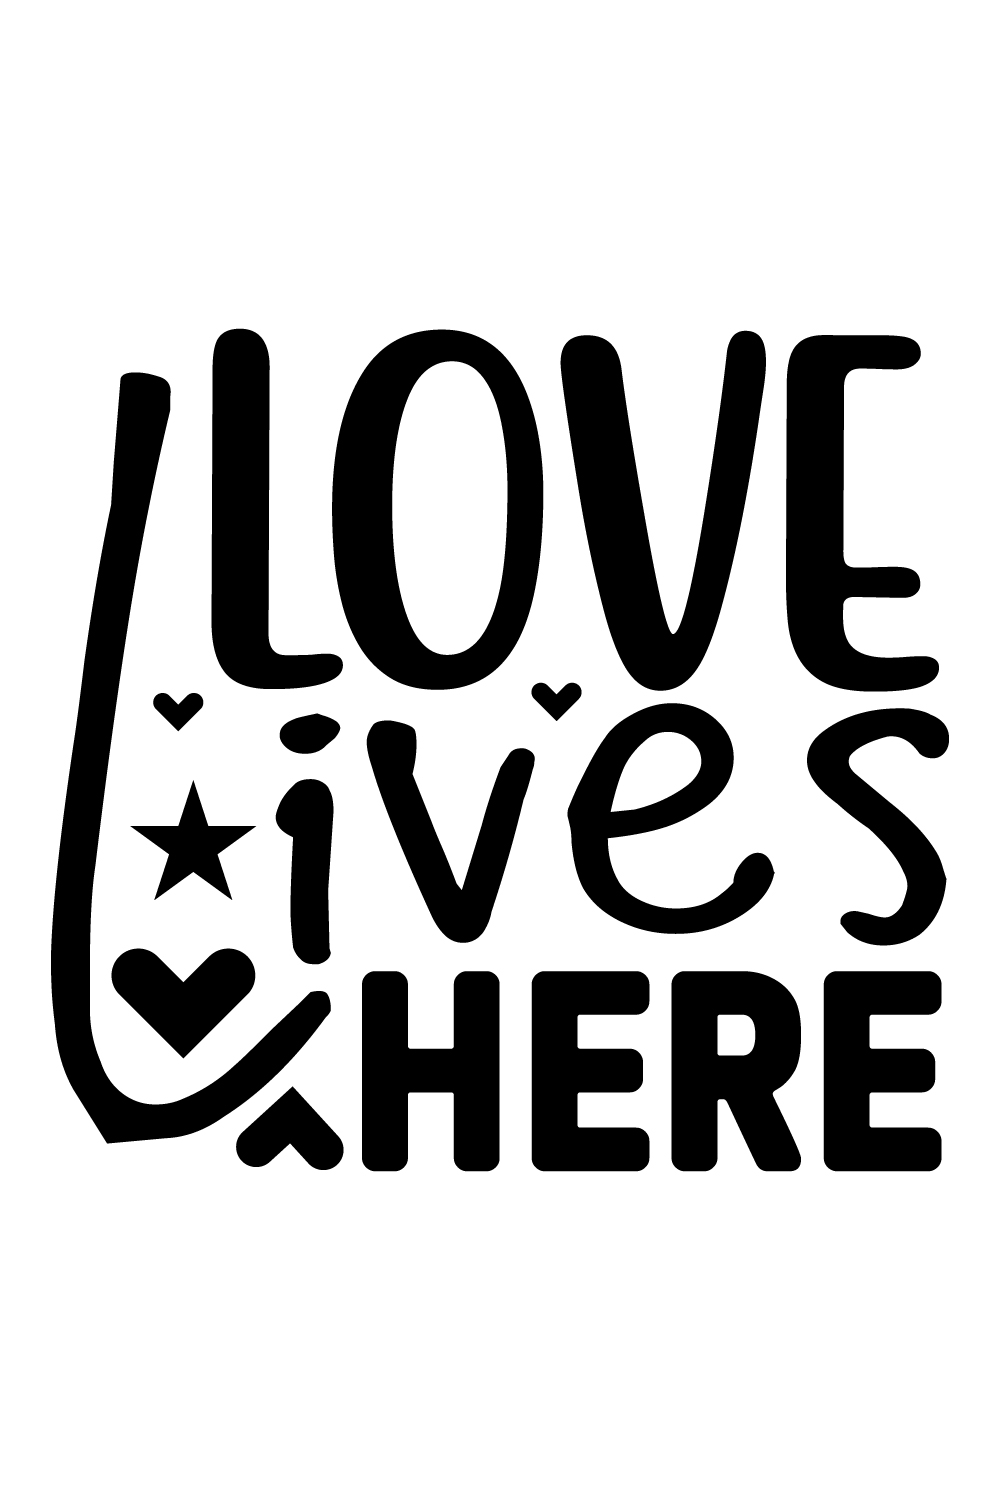 Love lives here pinterest preview image.